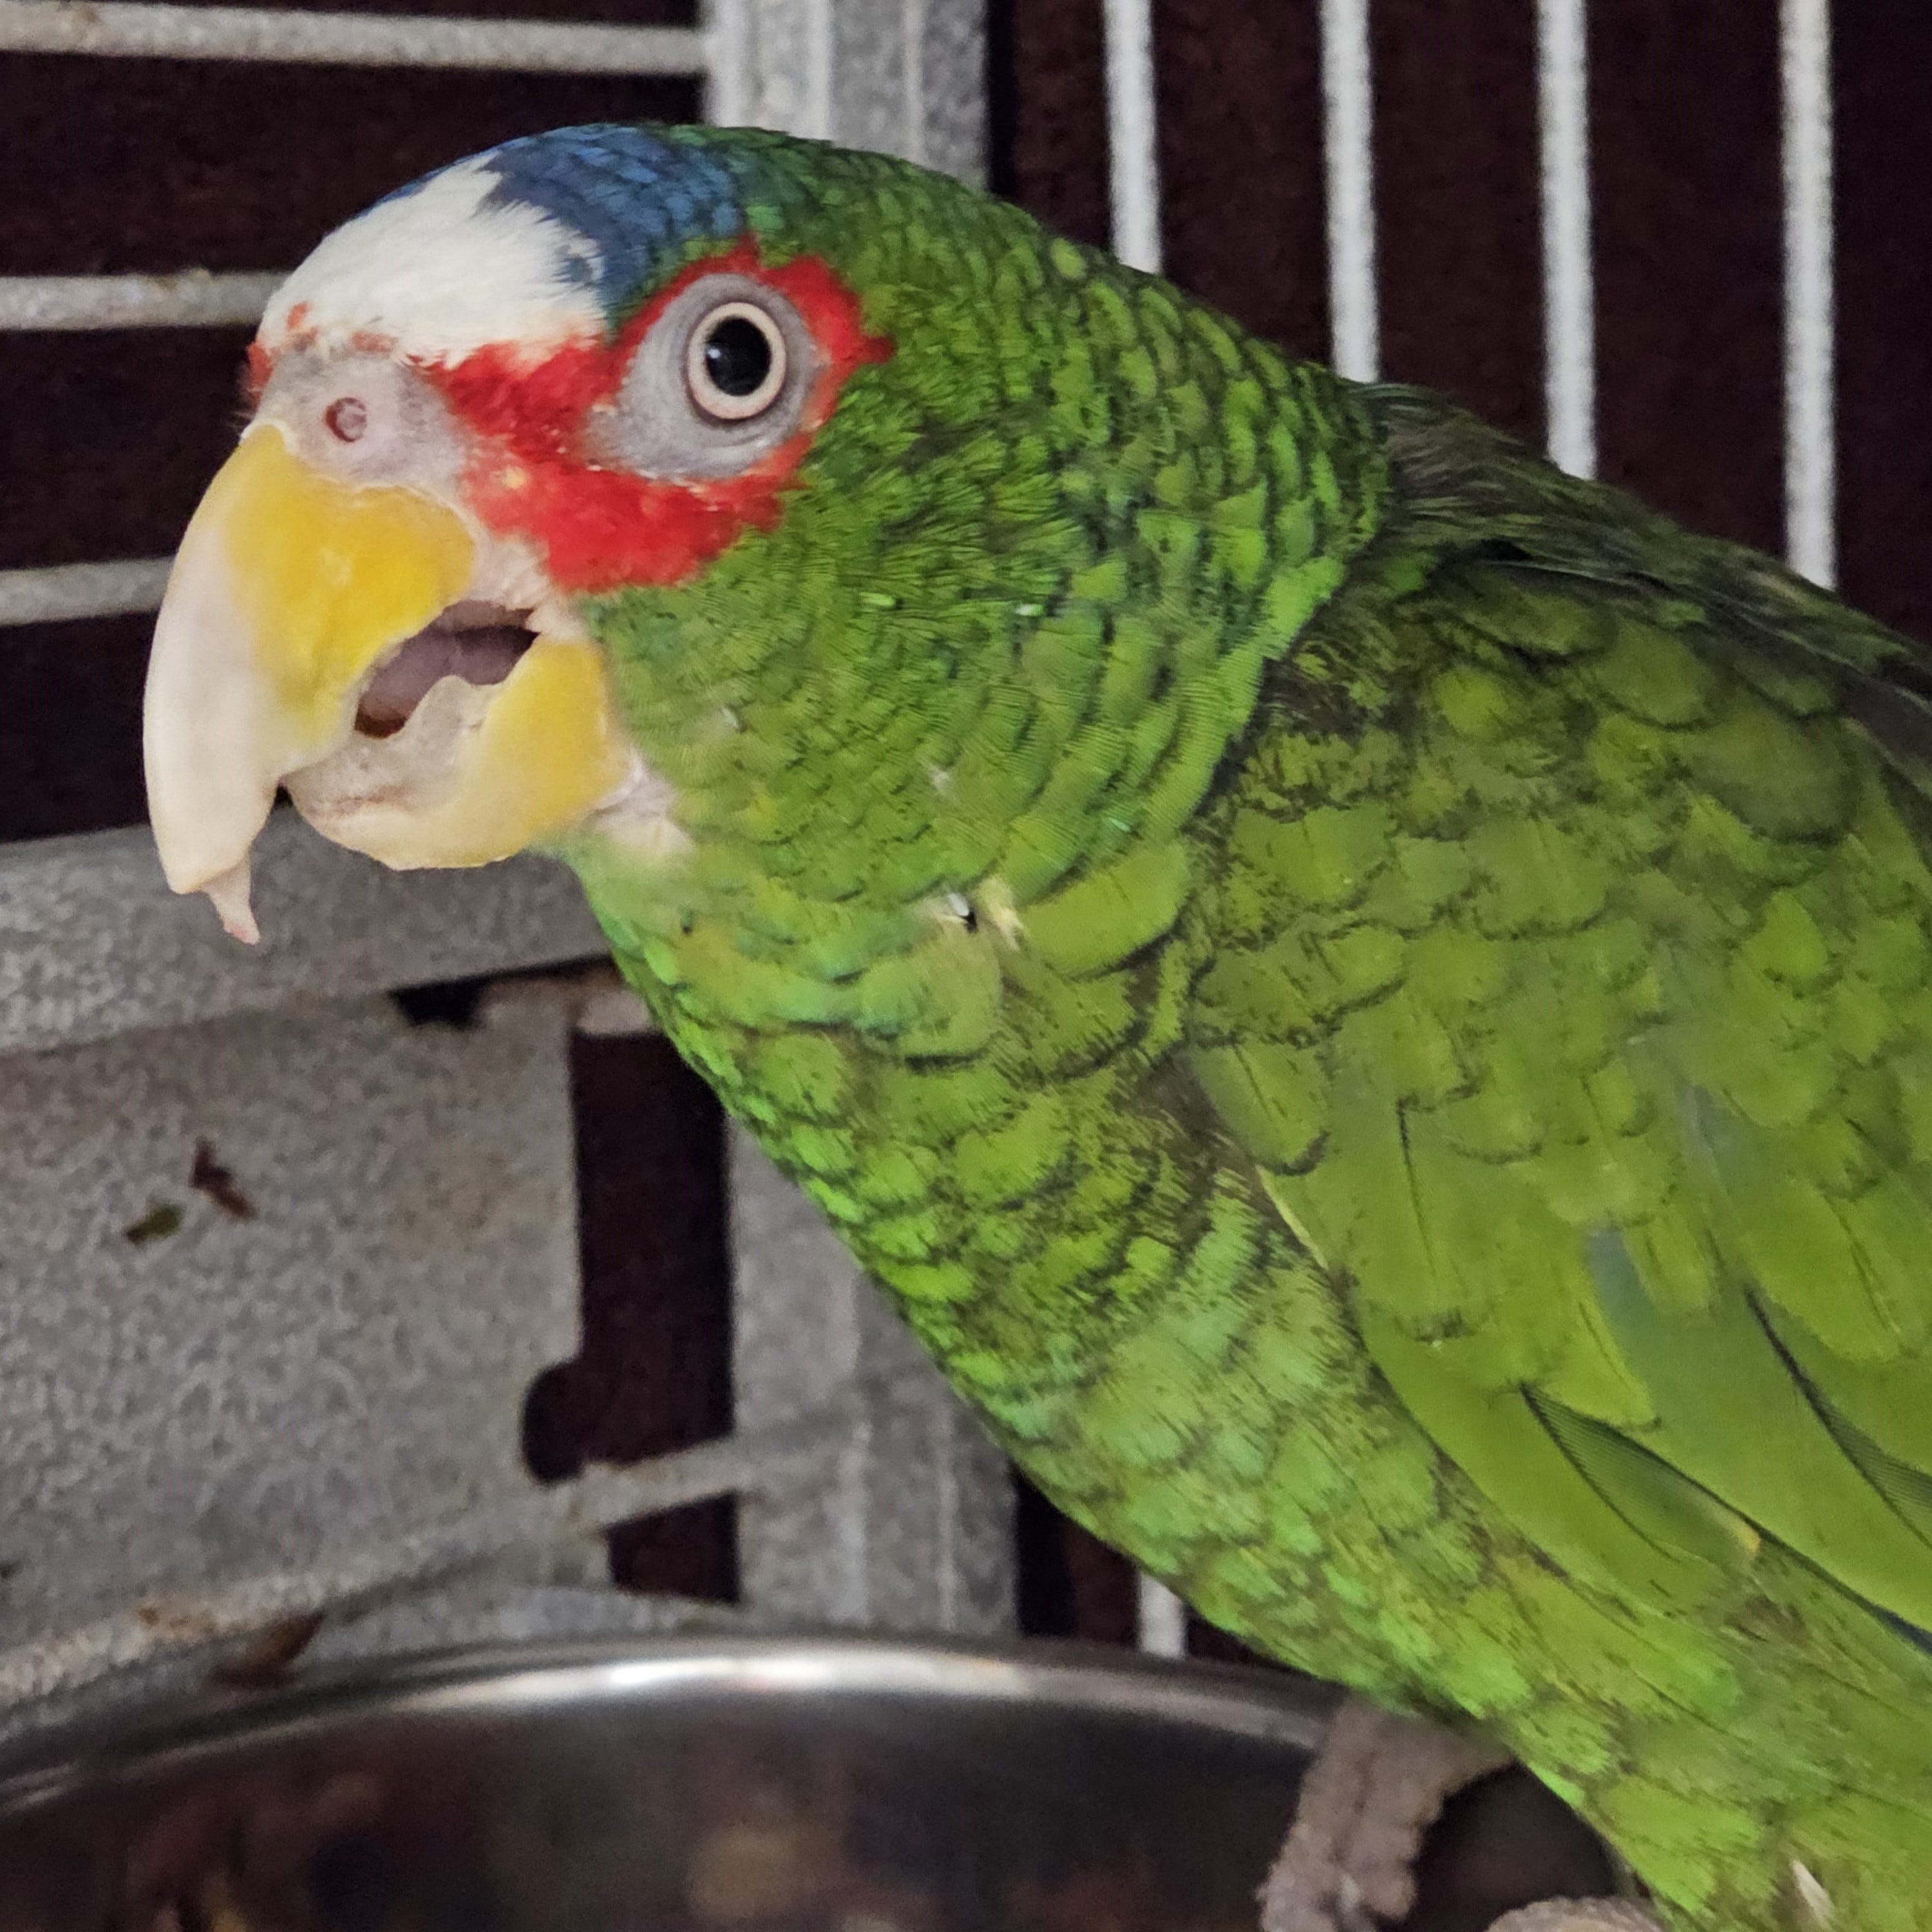 A 'potty-mouthed parrot' is up for adoption. 300 people came forward for the cursing conure.